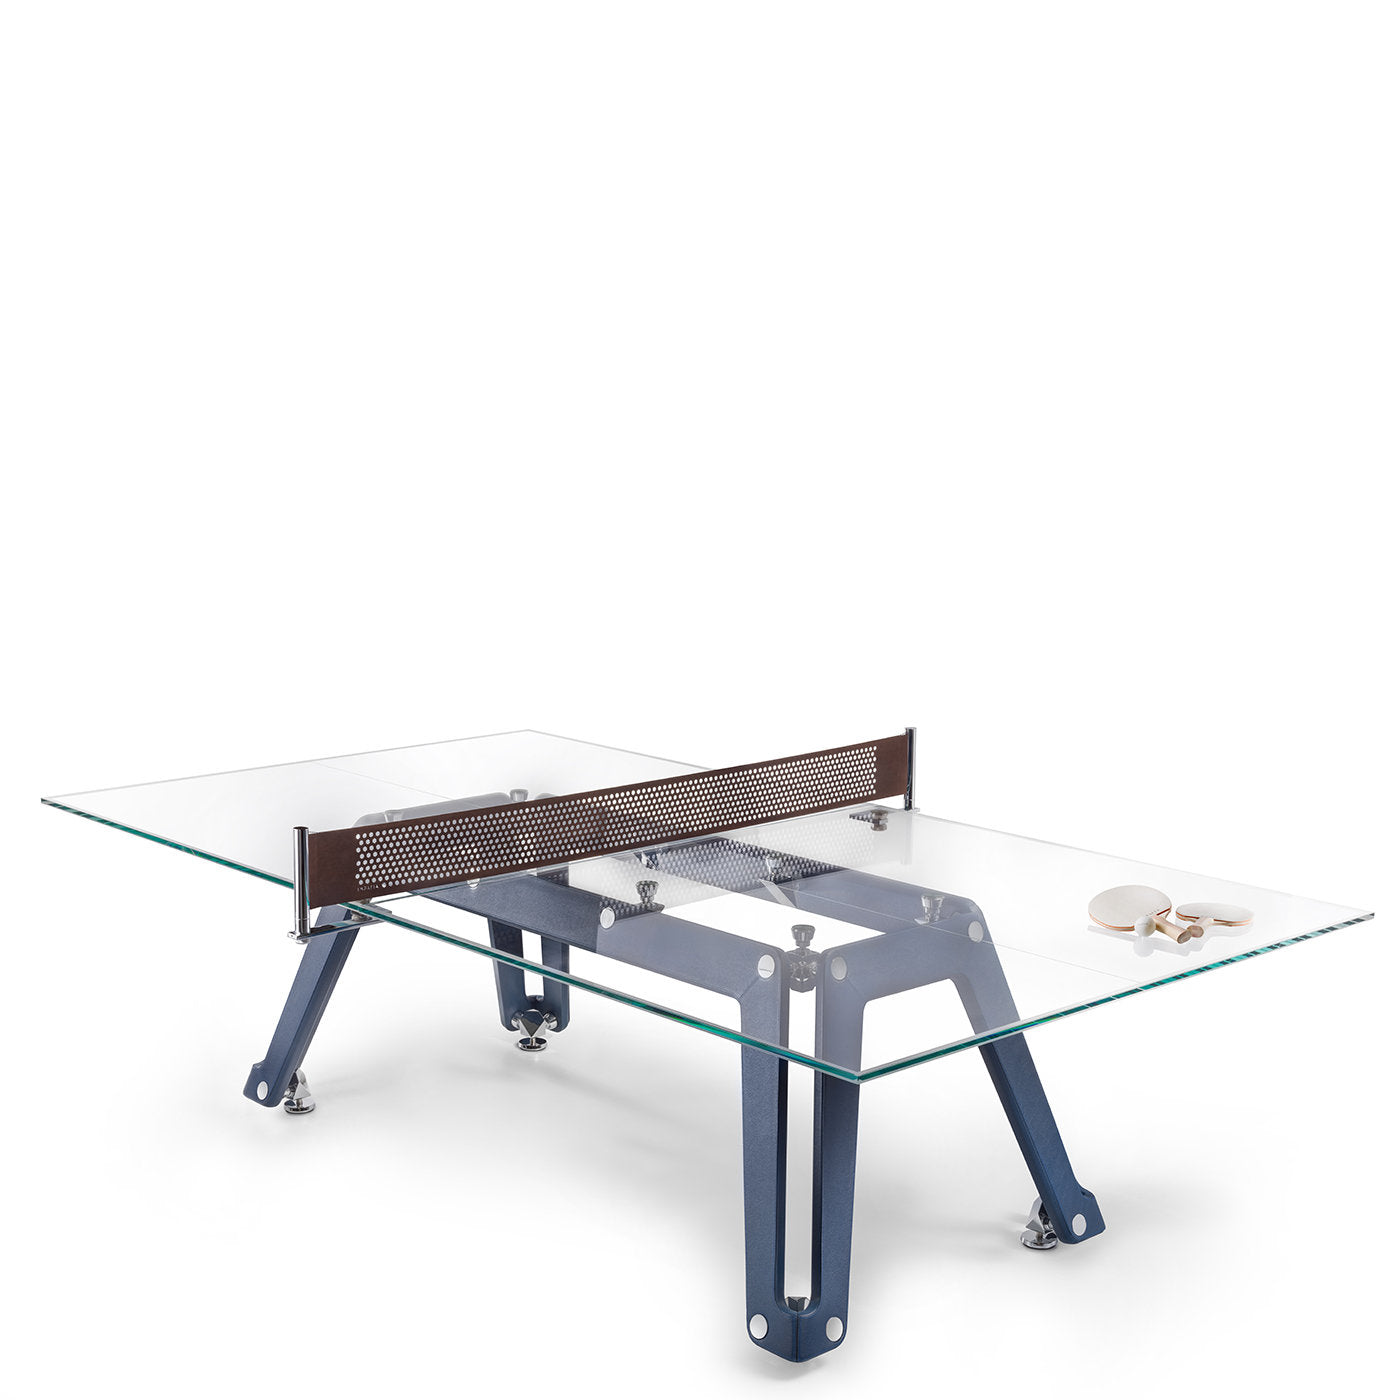 Lungolinea Glass Table Tennis Table by Adriano Design - Alternative view 1